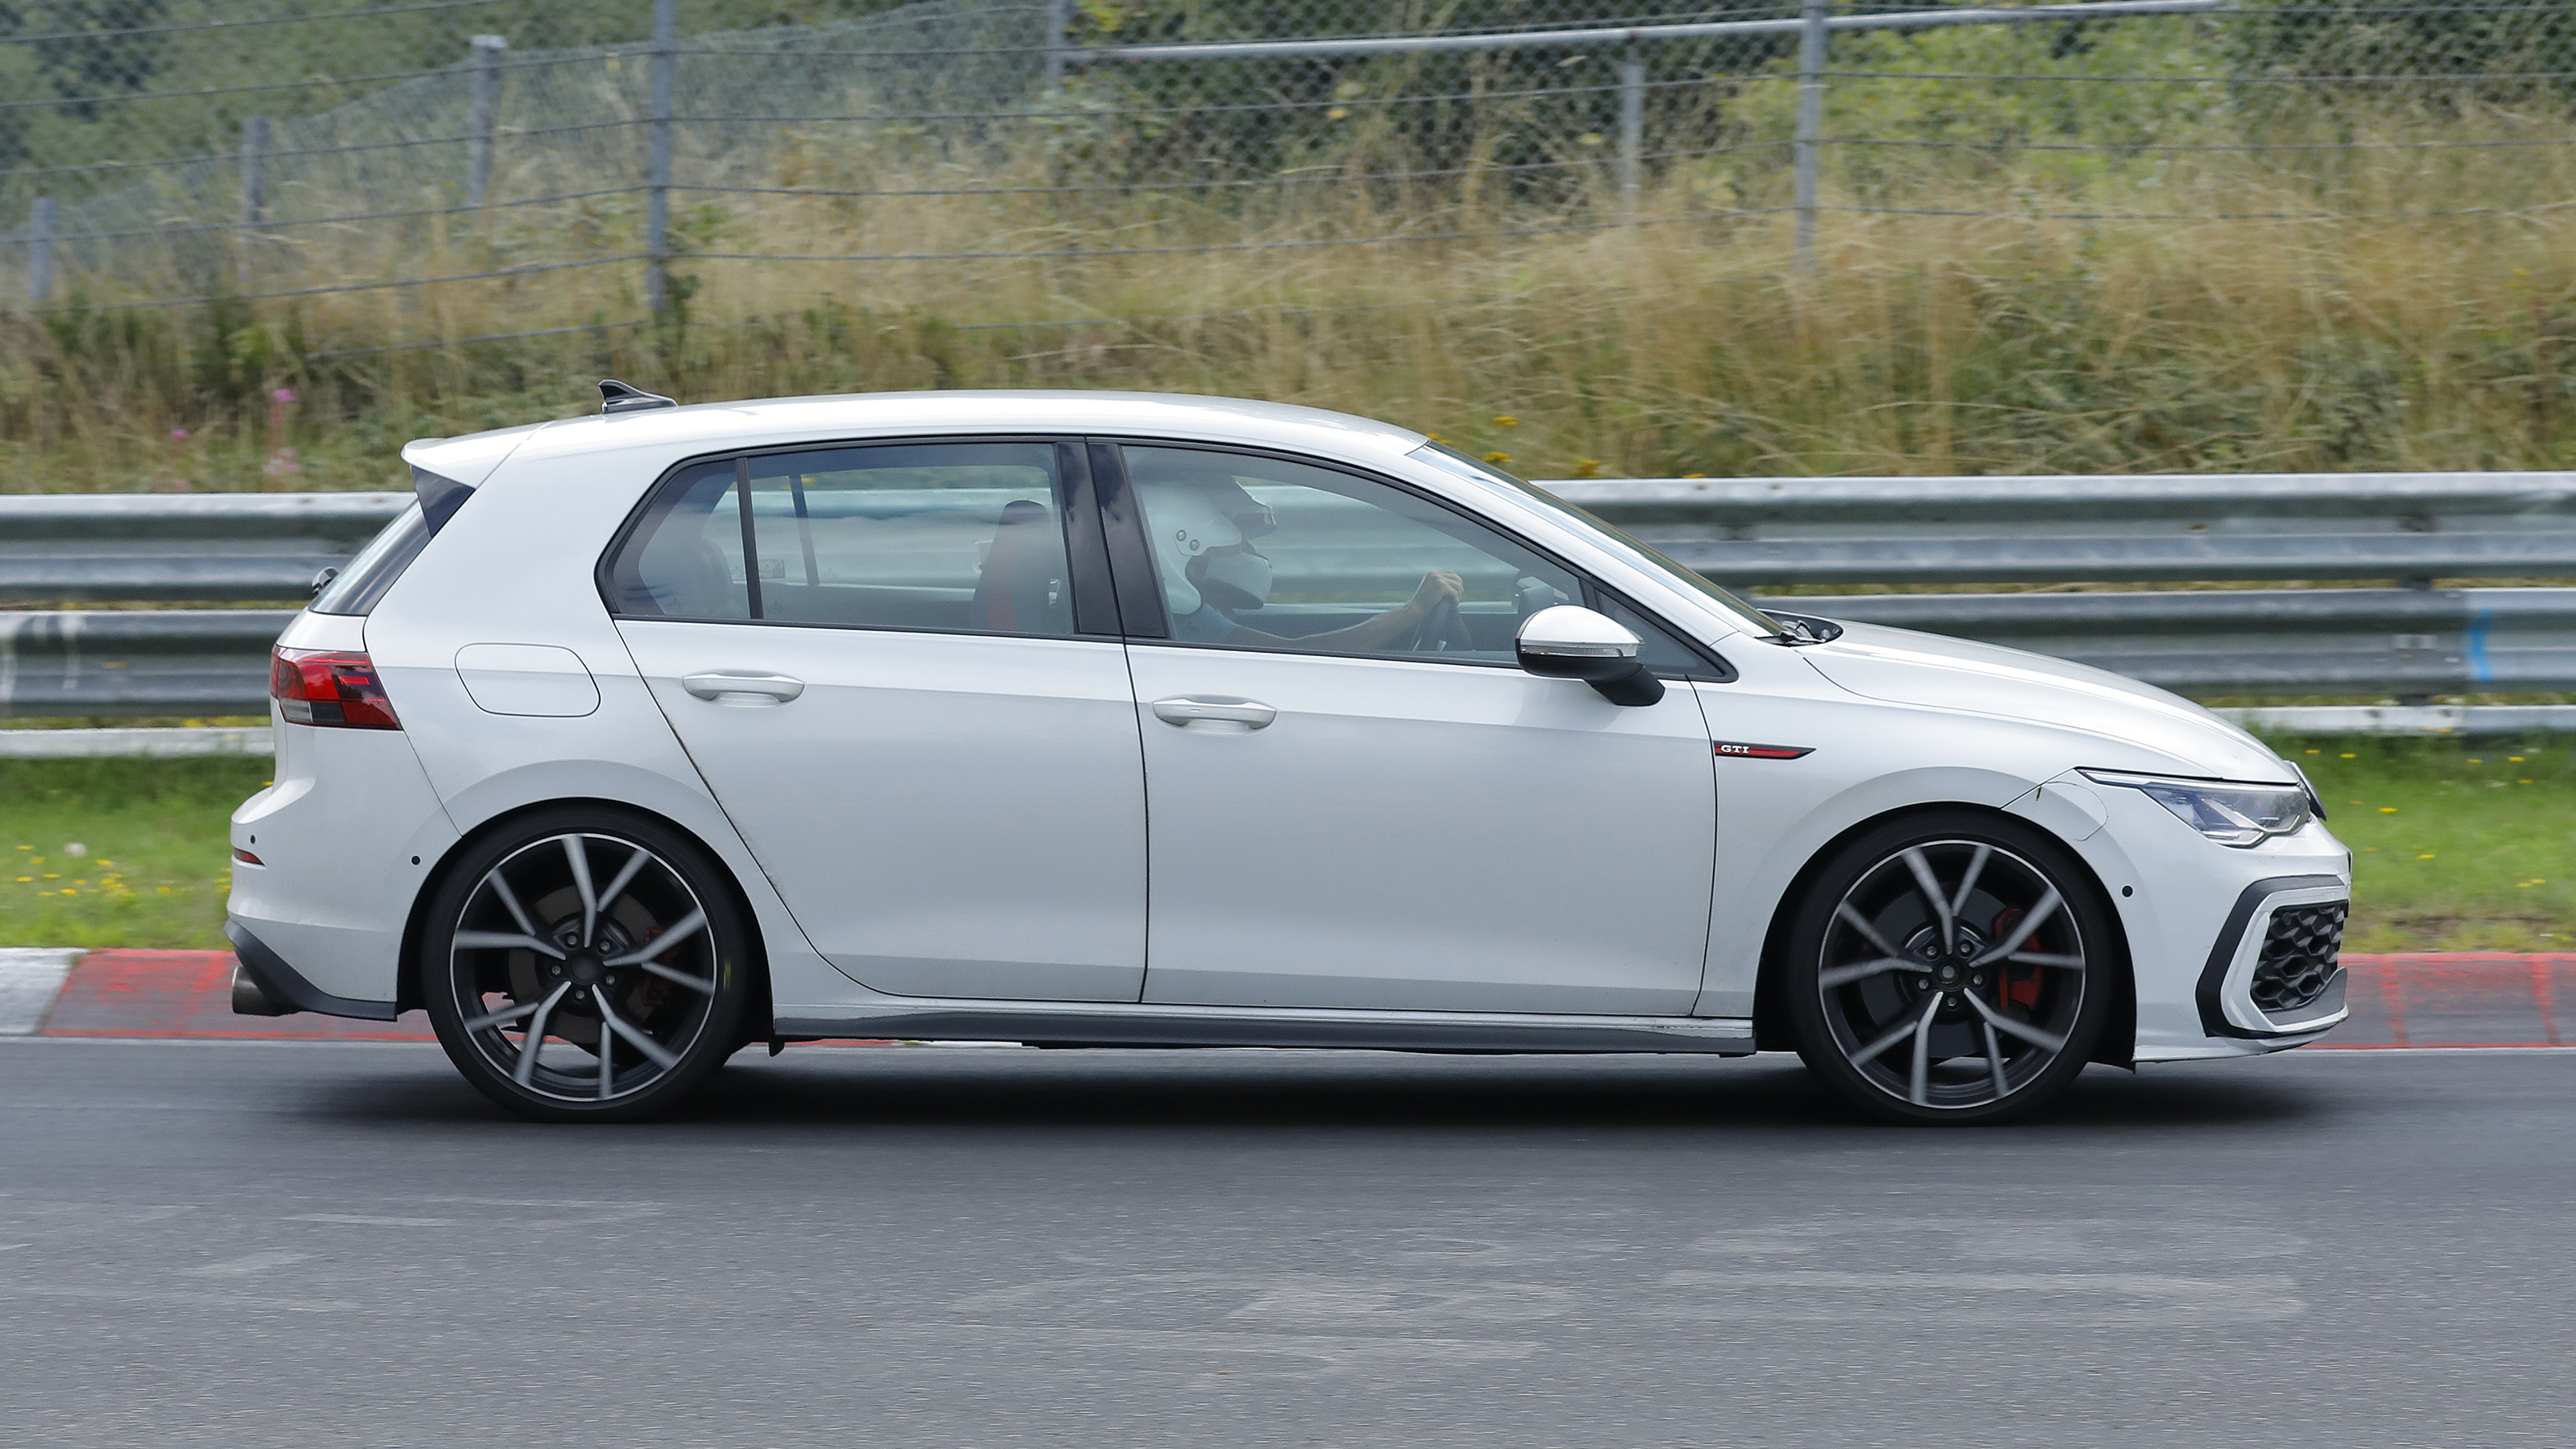 A new Volkswagen Golf GTI is on the way to address the Mk8's key